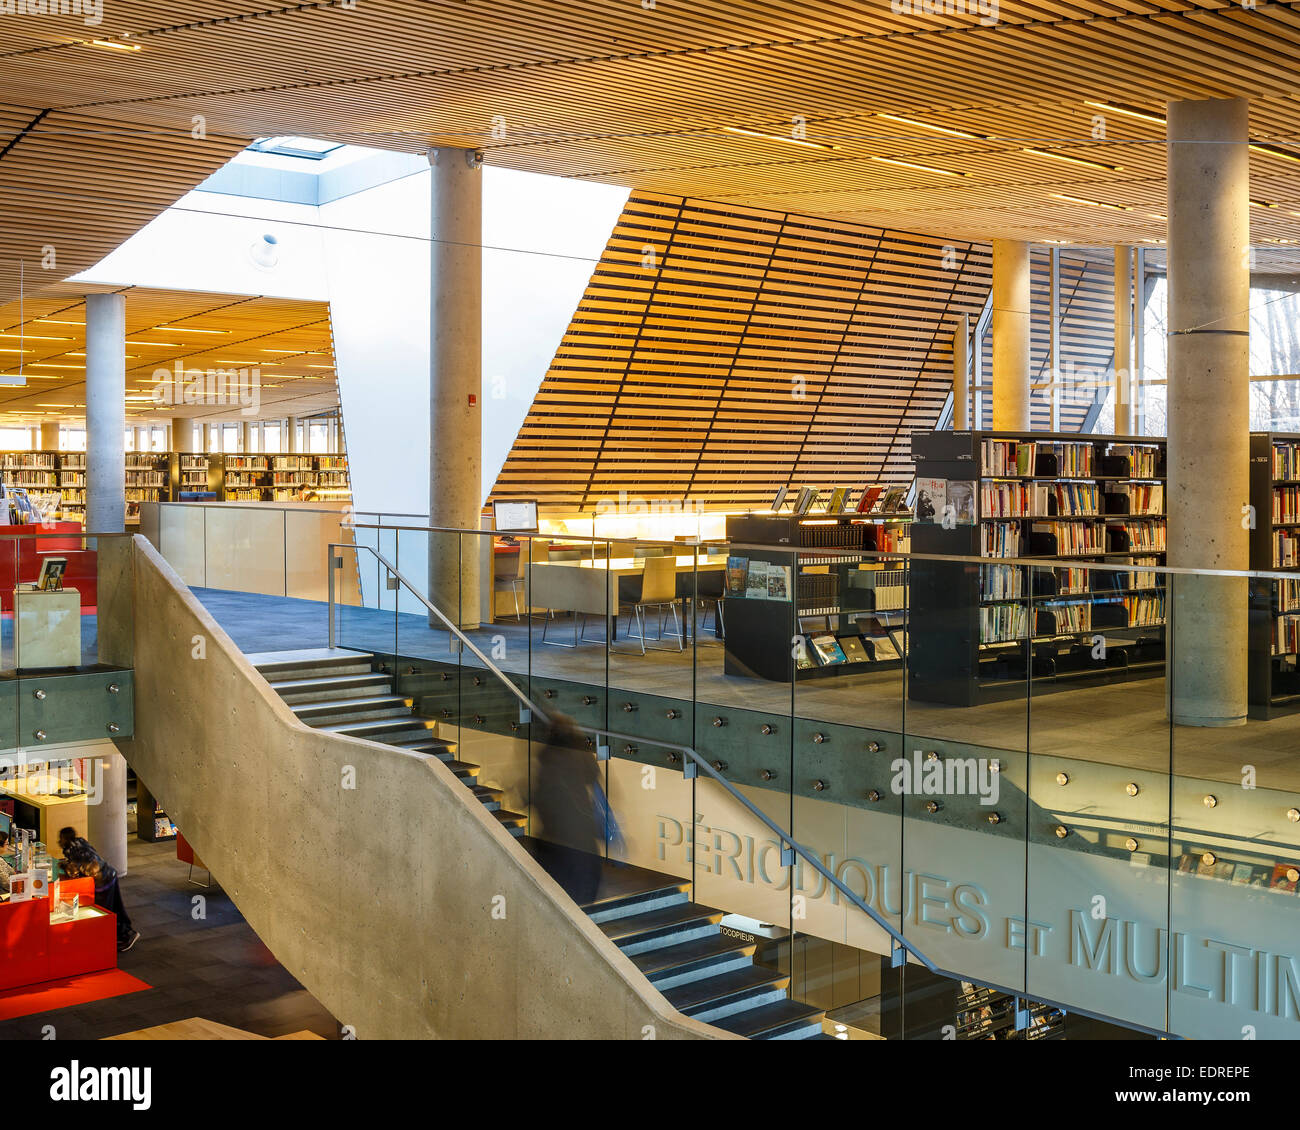 The Bibliothèque du Boisé, Montreal, Canada. Architect: Lemay Architectes,  2013. The ceiling fold bisects the library and brings Stock Photo - Alamy